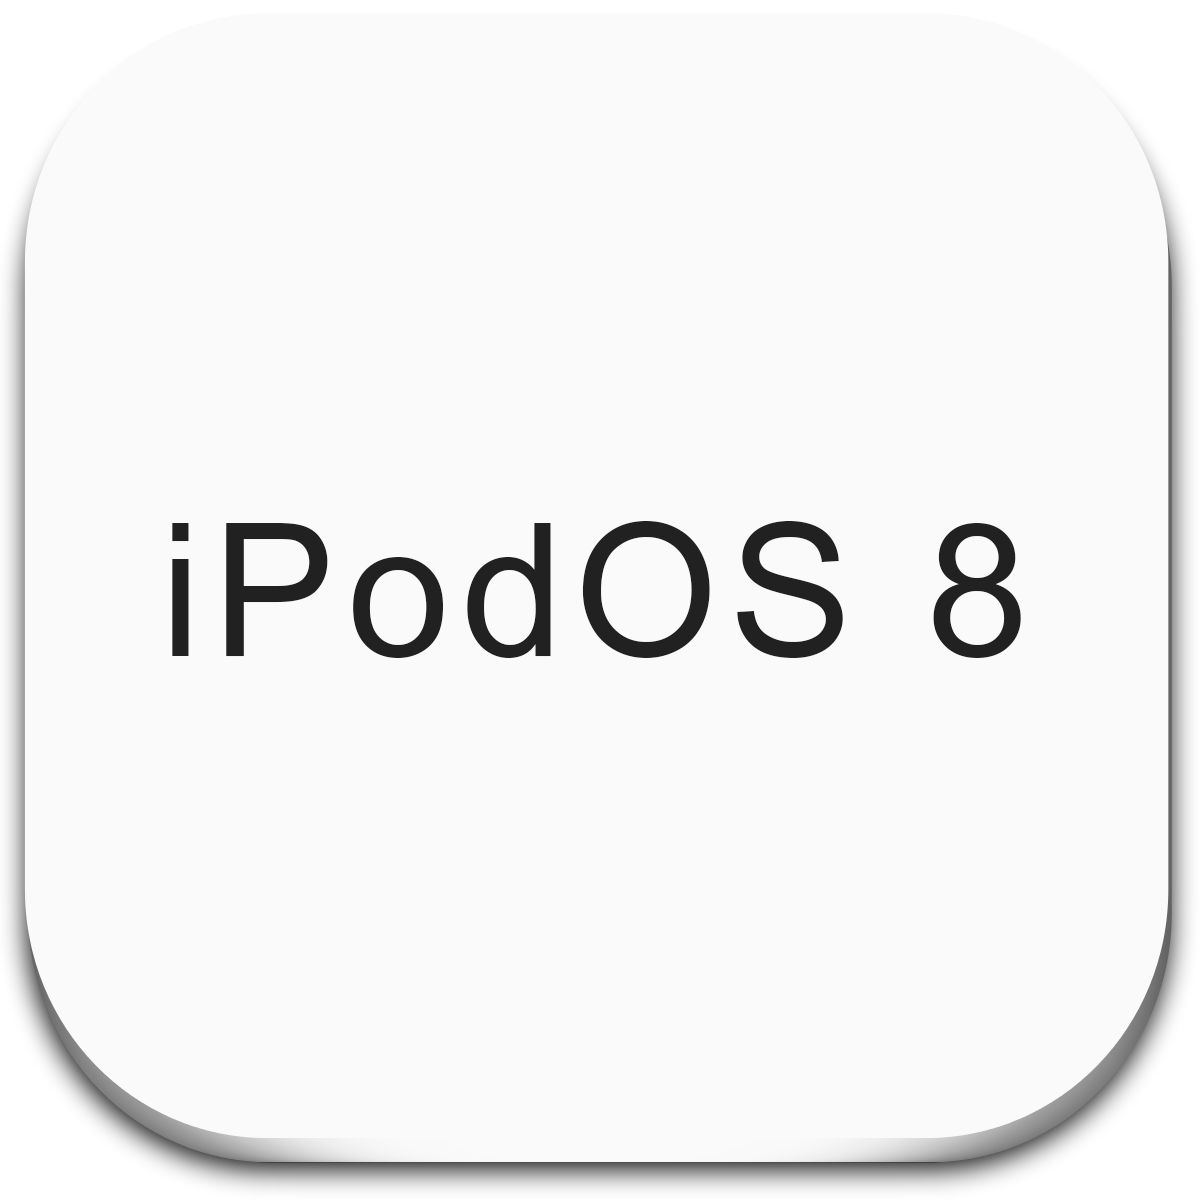 Download IPSW Files for iPodOS 8